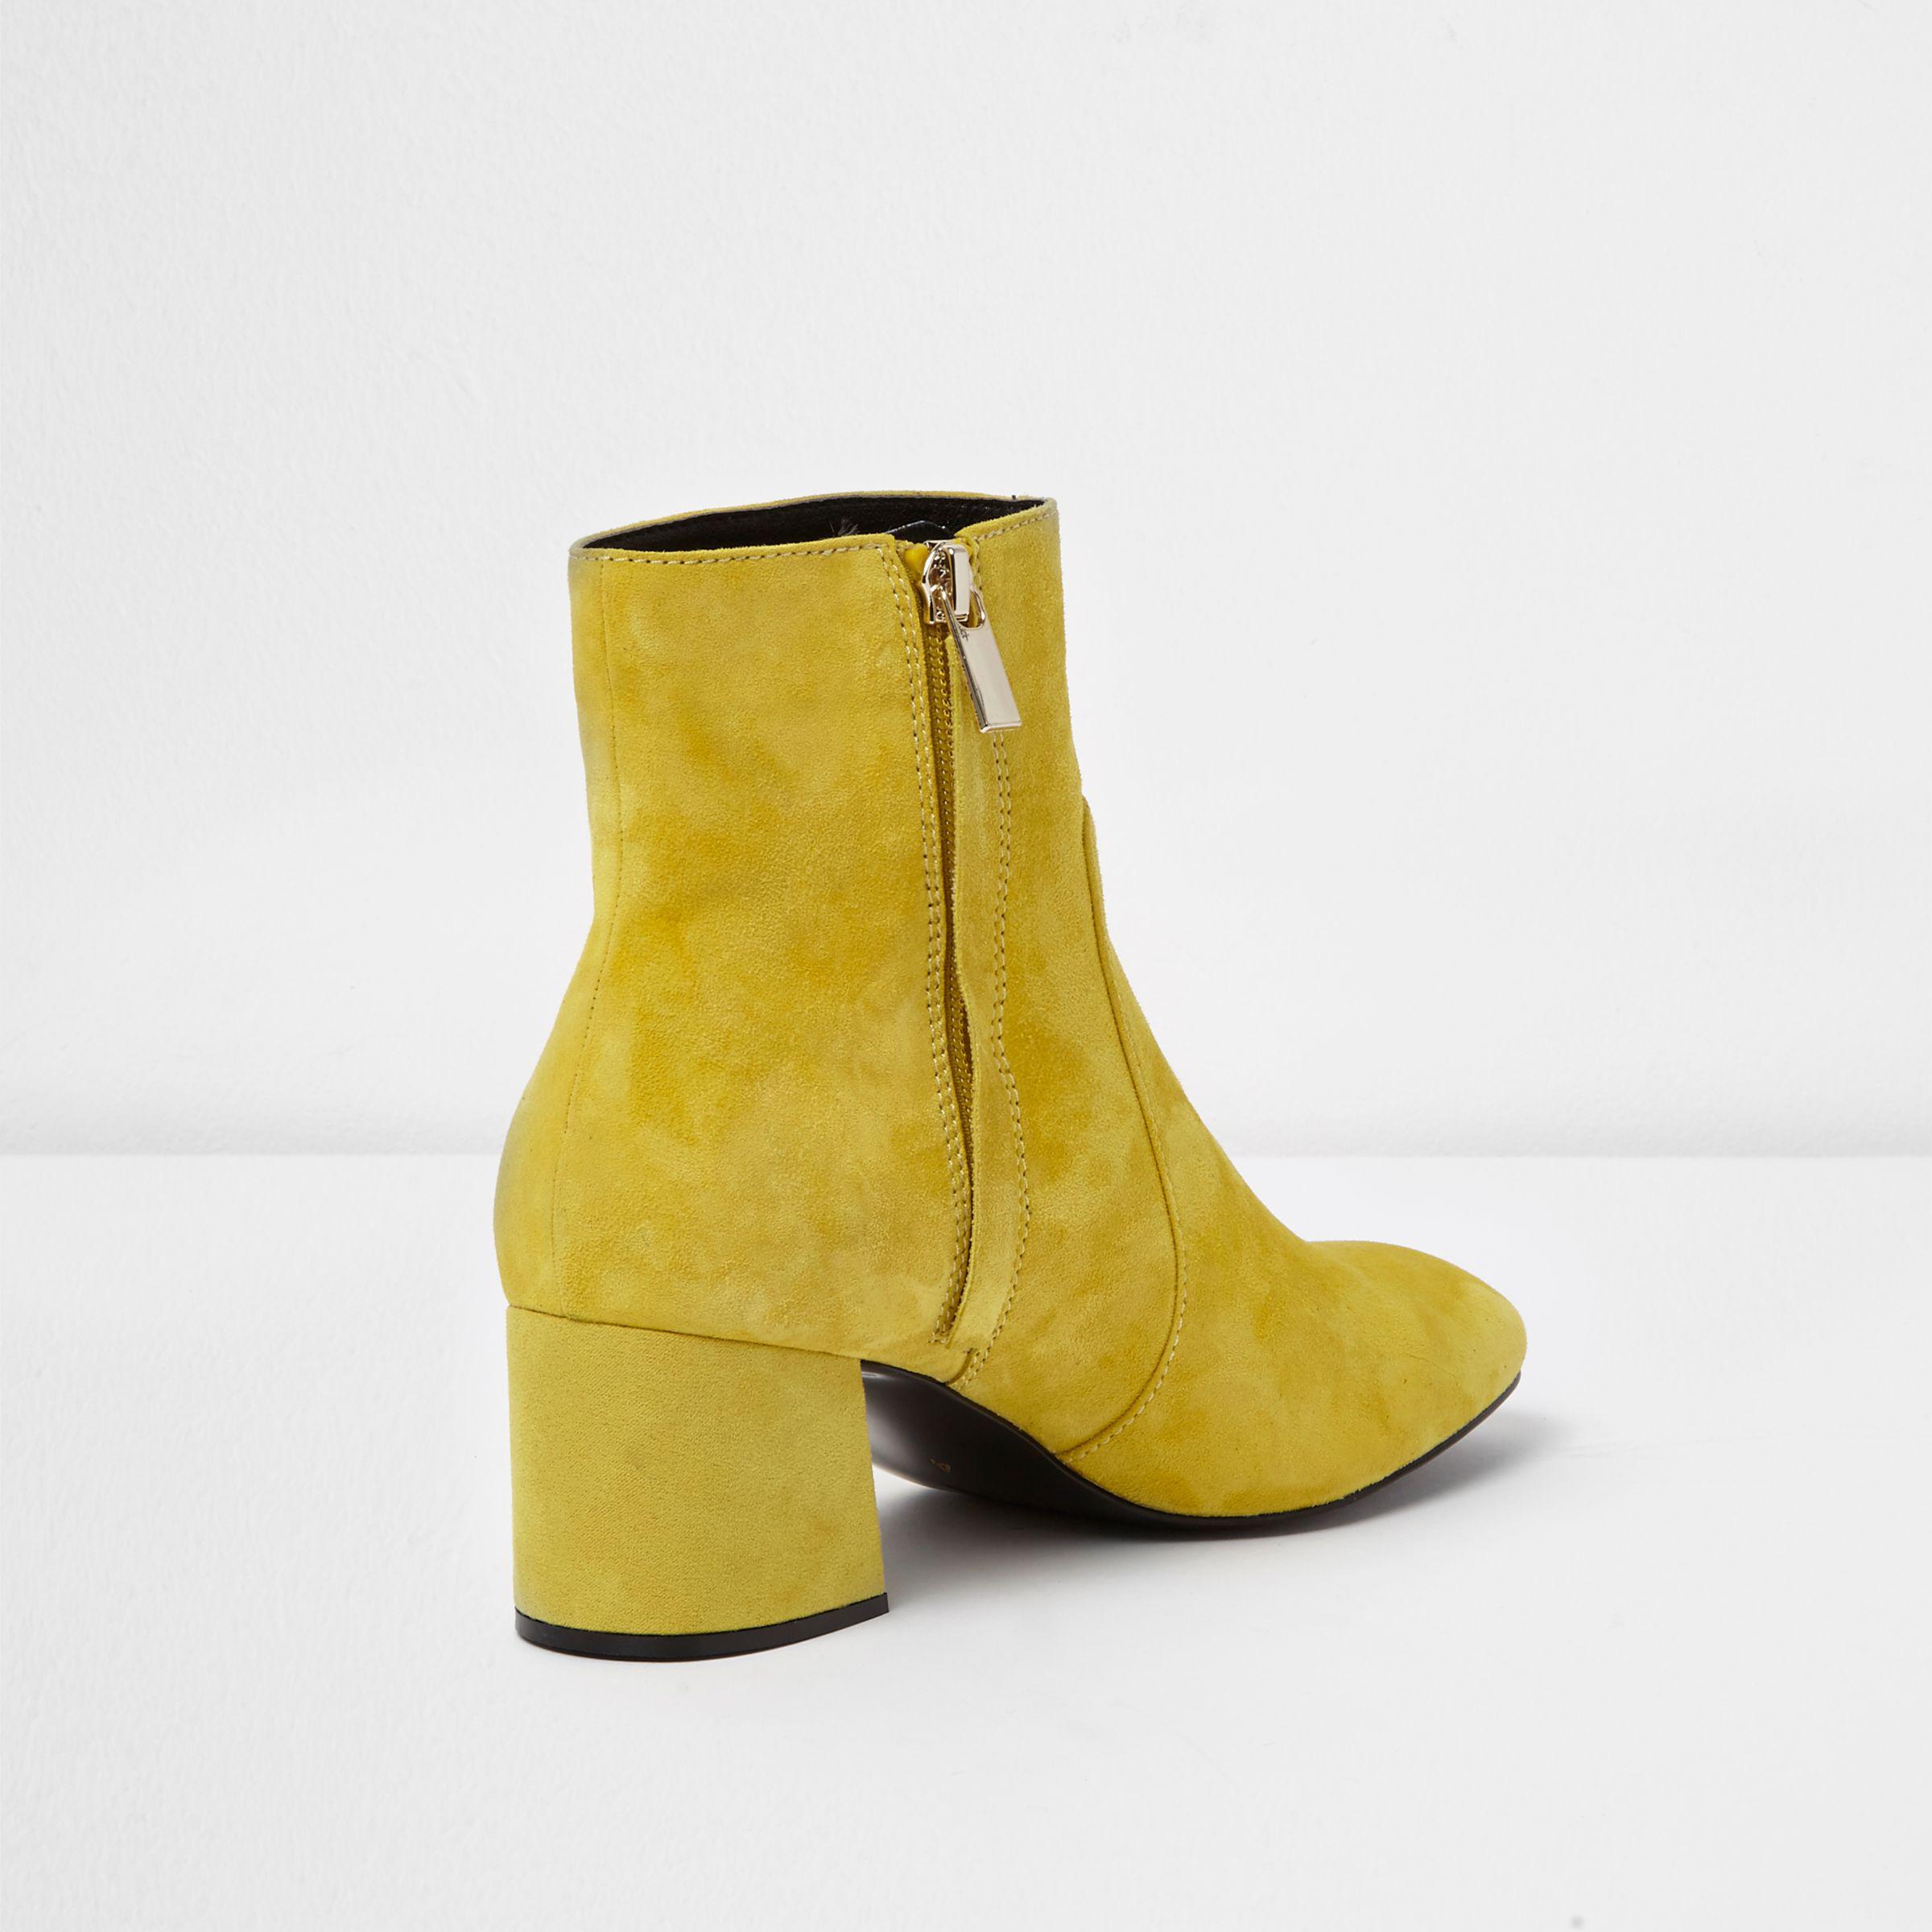 River Island Yellow Suede Block Heel Ankle Boots - Lyst